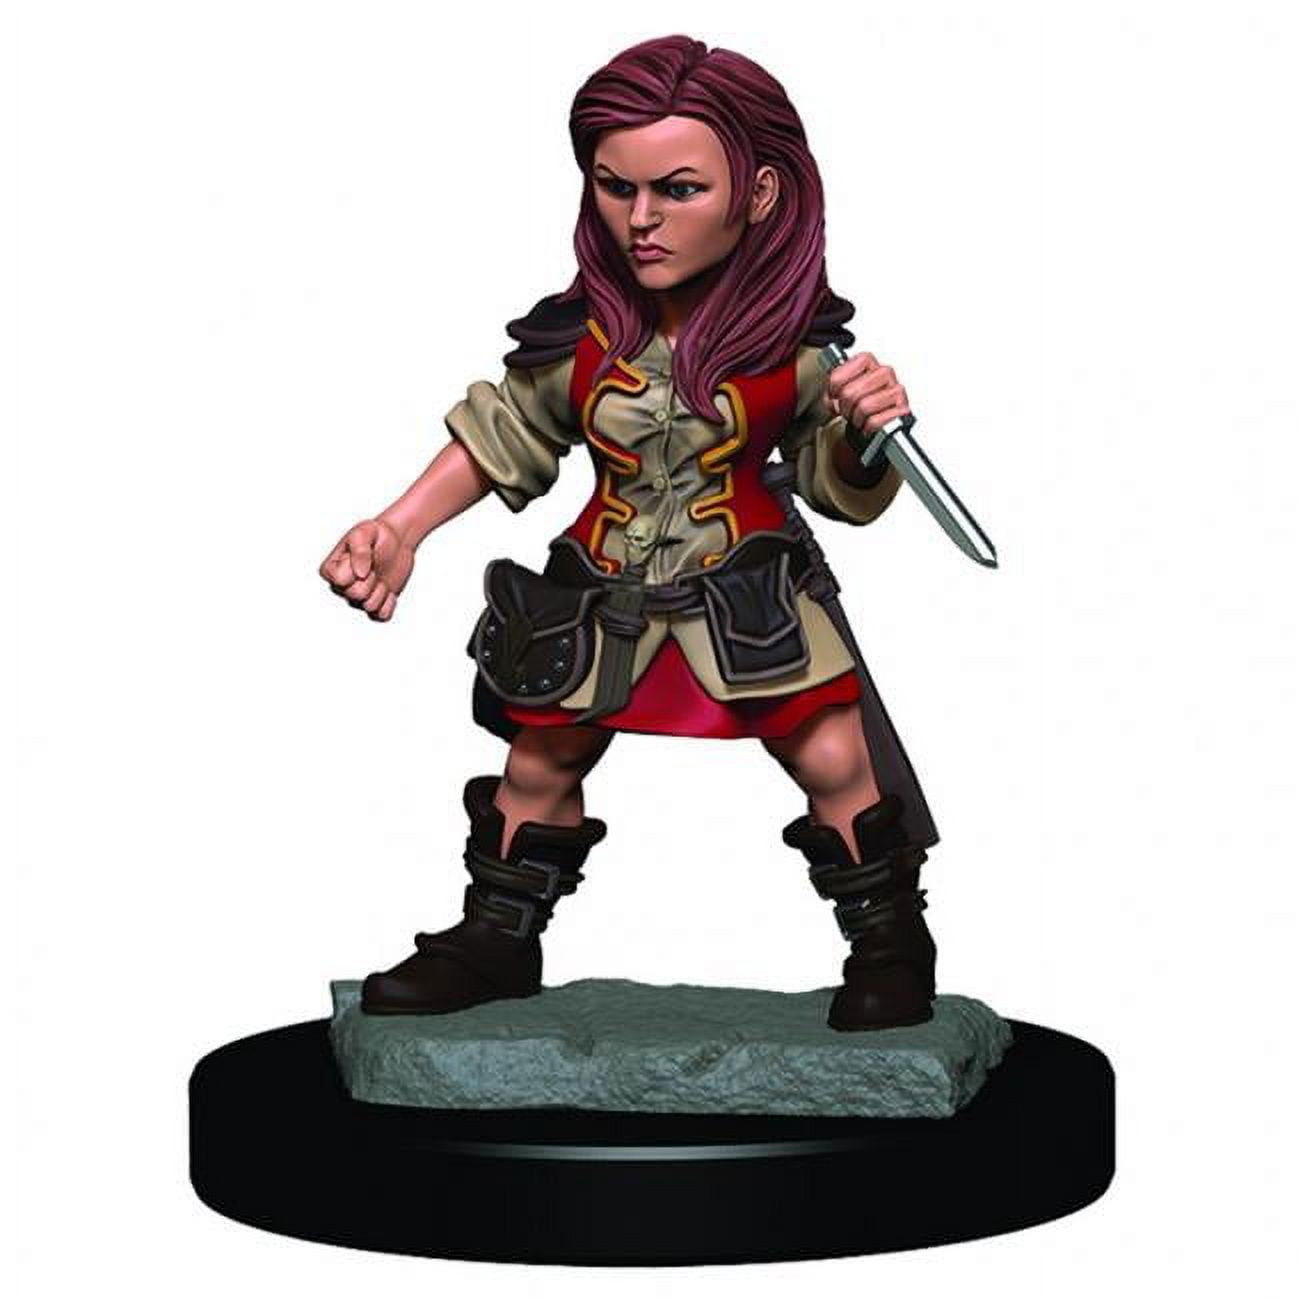 Picture of WizKids WZK93019 Dungeons & Dragons Icons of the Realms Premium Halfling Female Rogue Miniature